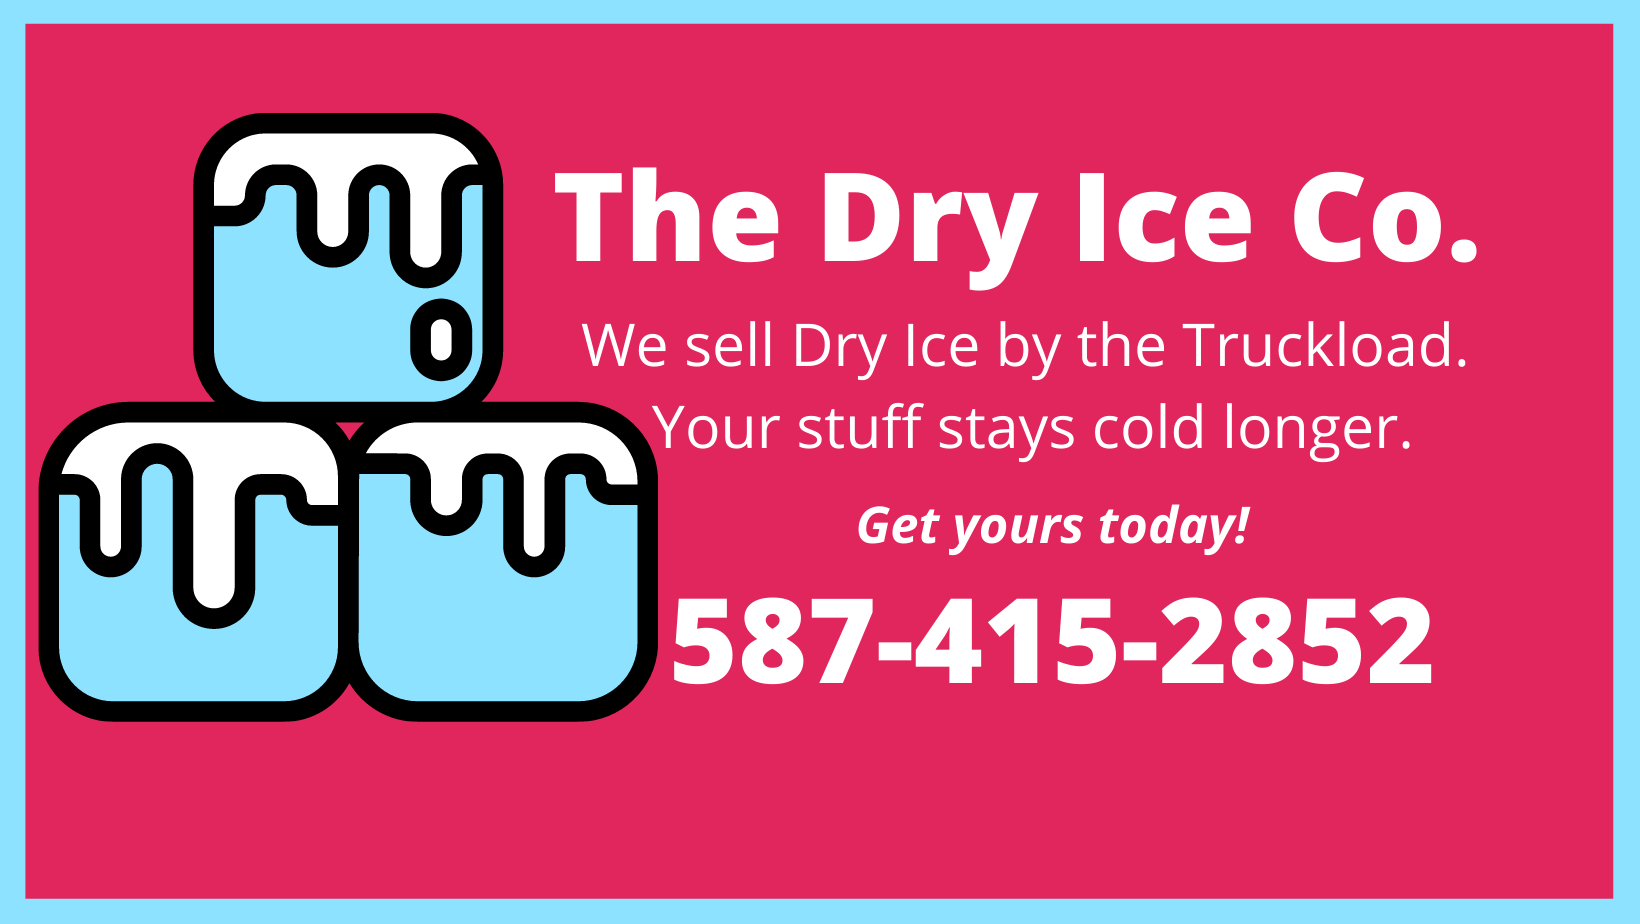 The Dry Ice Co